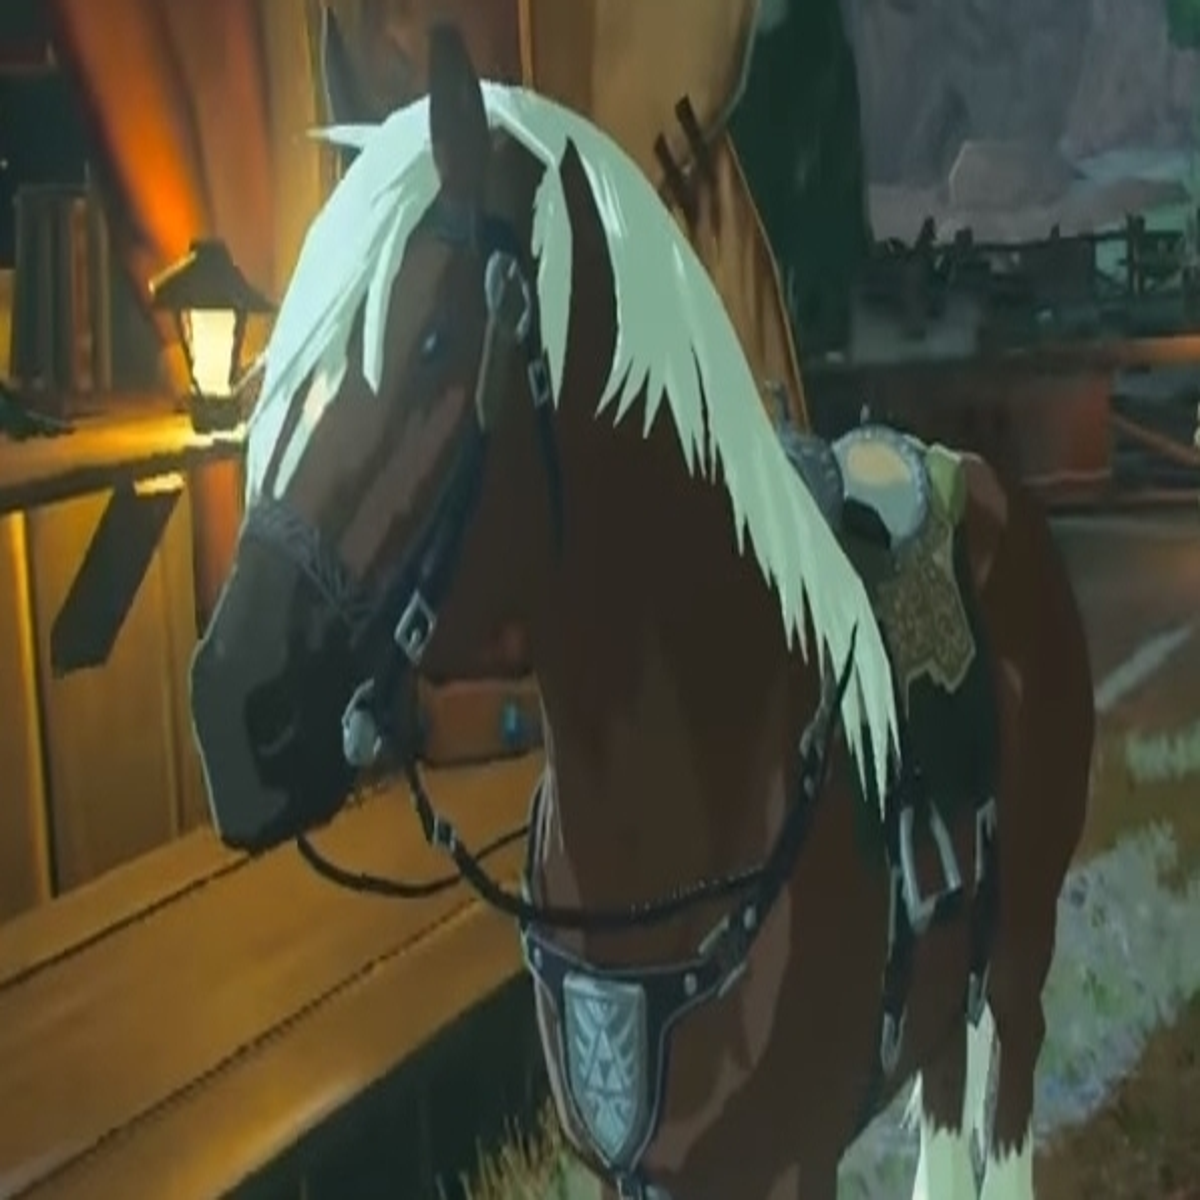 Horses and Mounts - The Legend of Zelda: Breath of the Wild Wiki